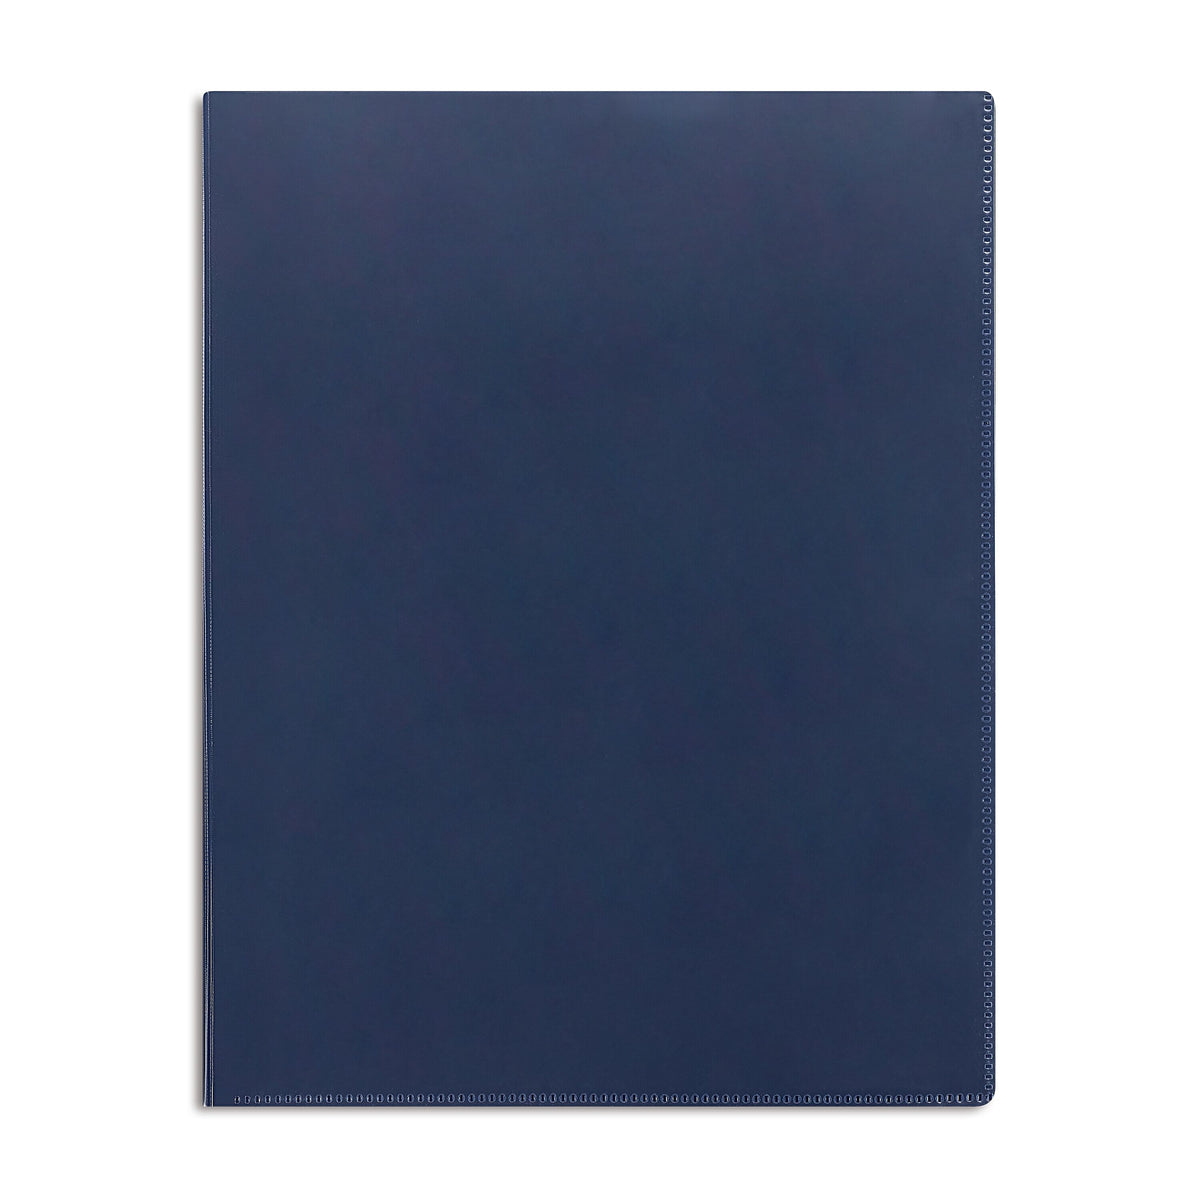 Staples Letter Clear Cover Presentation Book, Blue